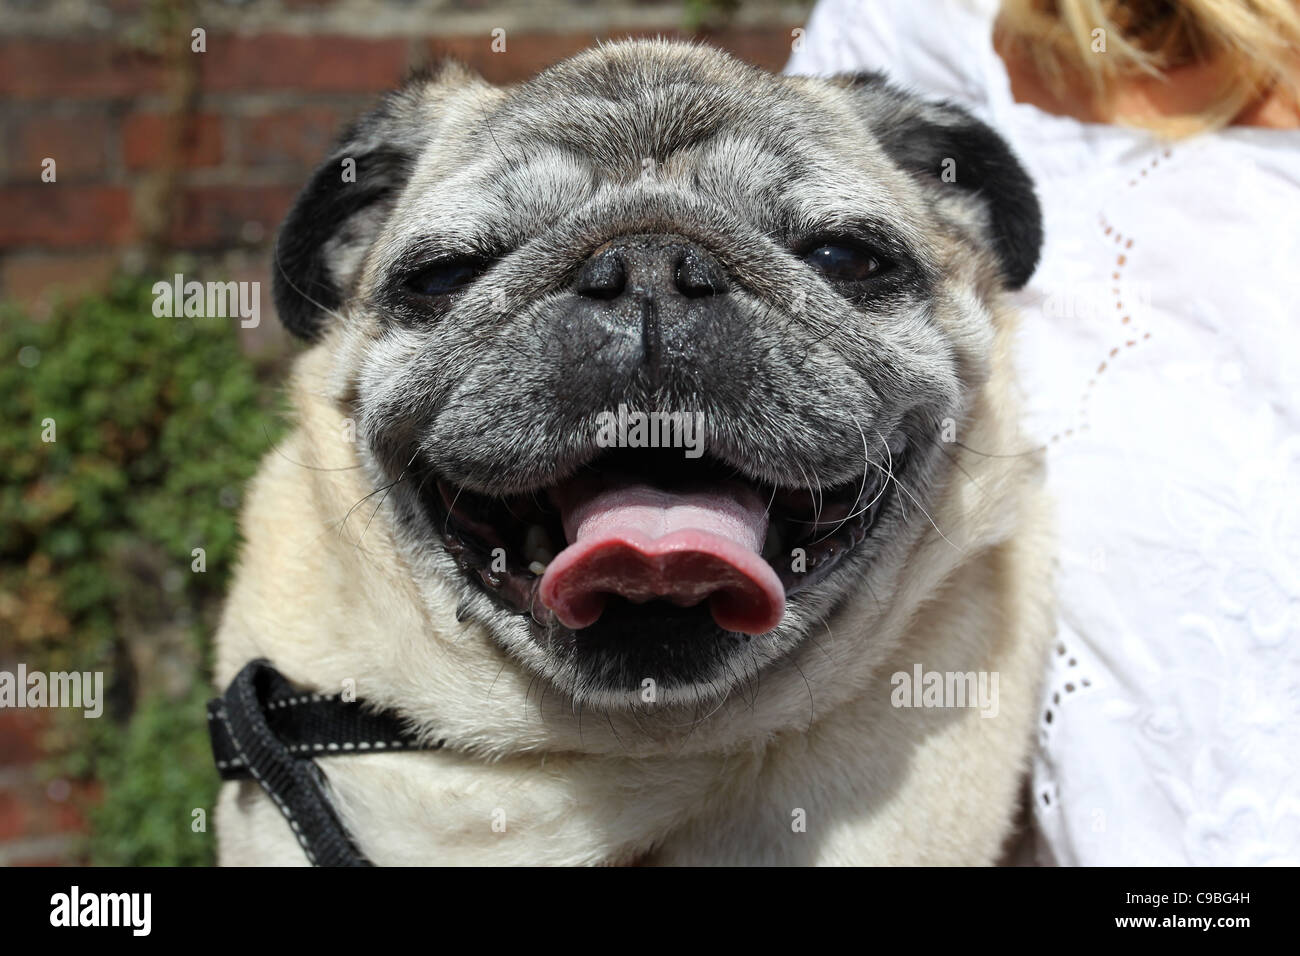 A woman holding her pet pug in Lewes, East Sussex, UK. Stock Photo